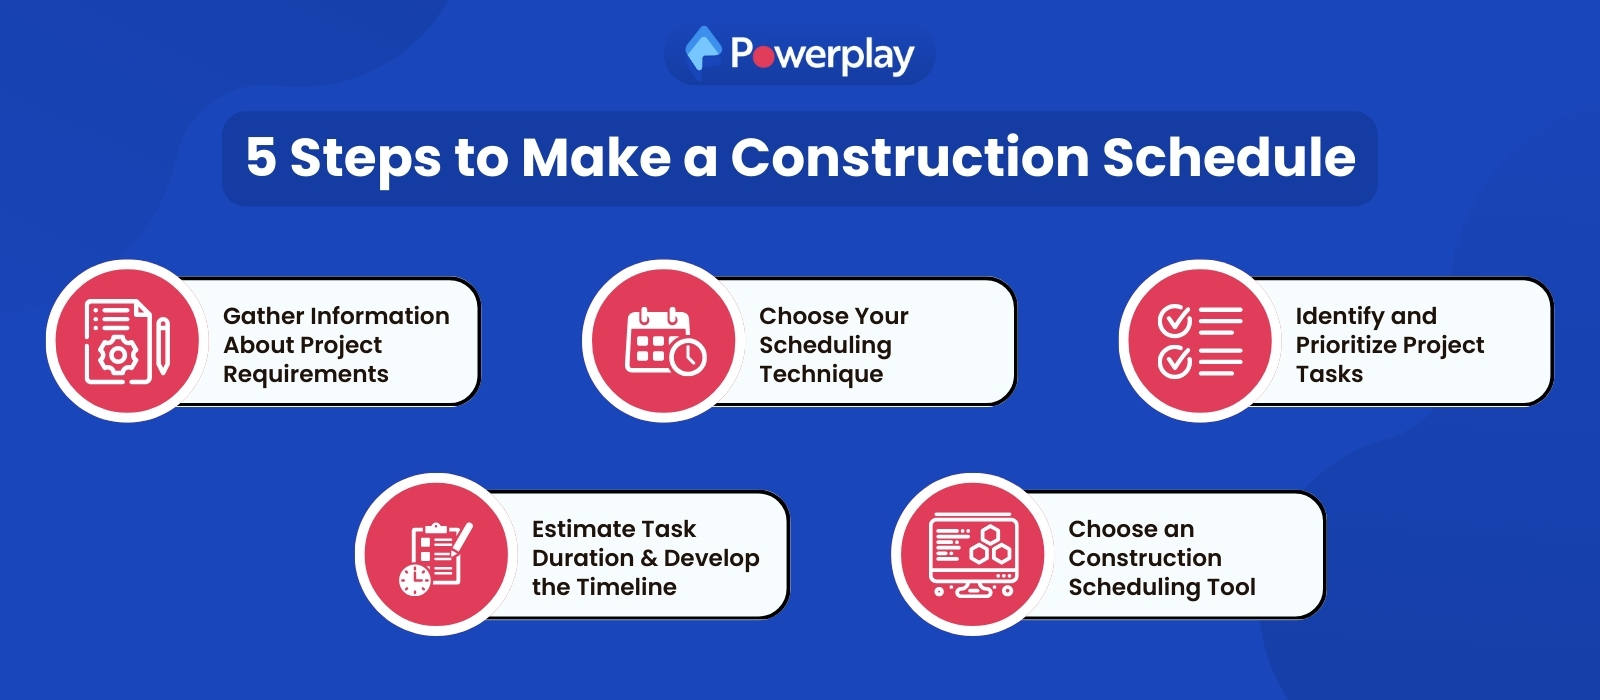 5 steps of Construction Scheduling